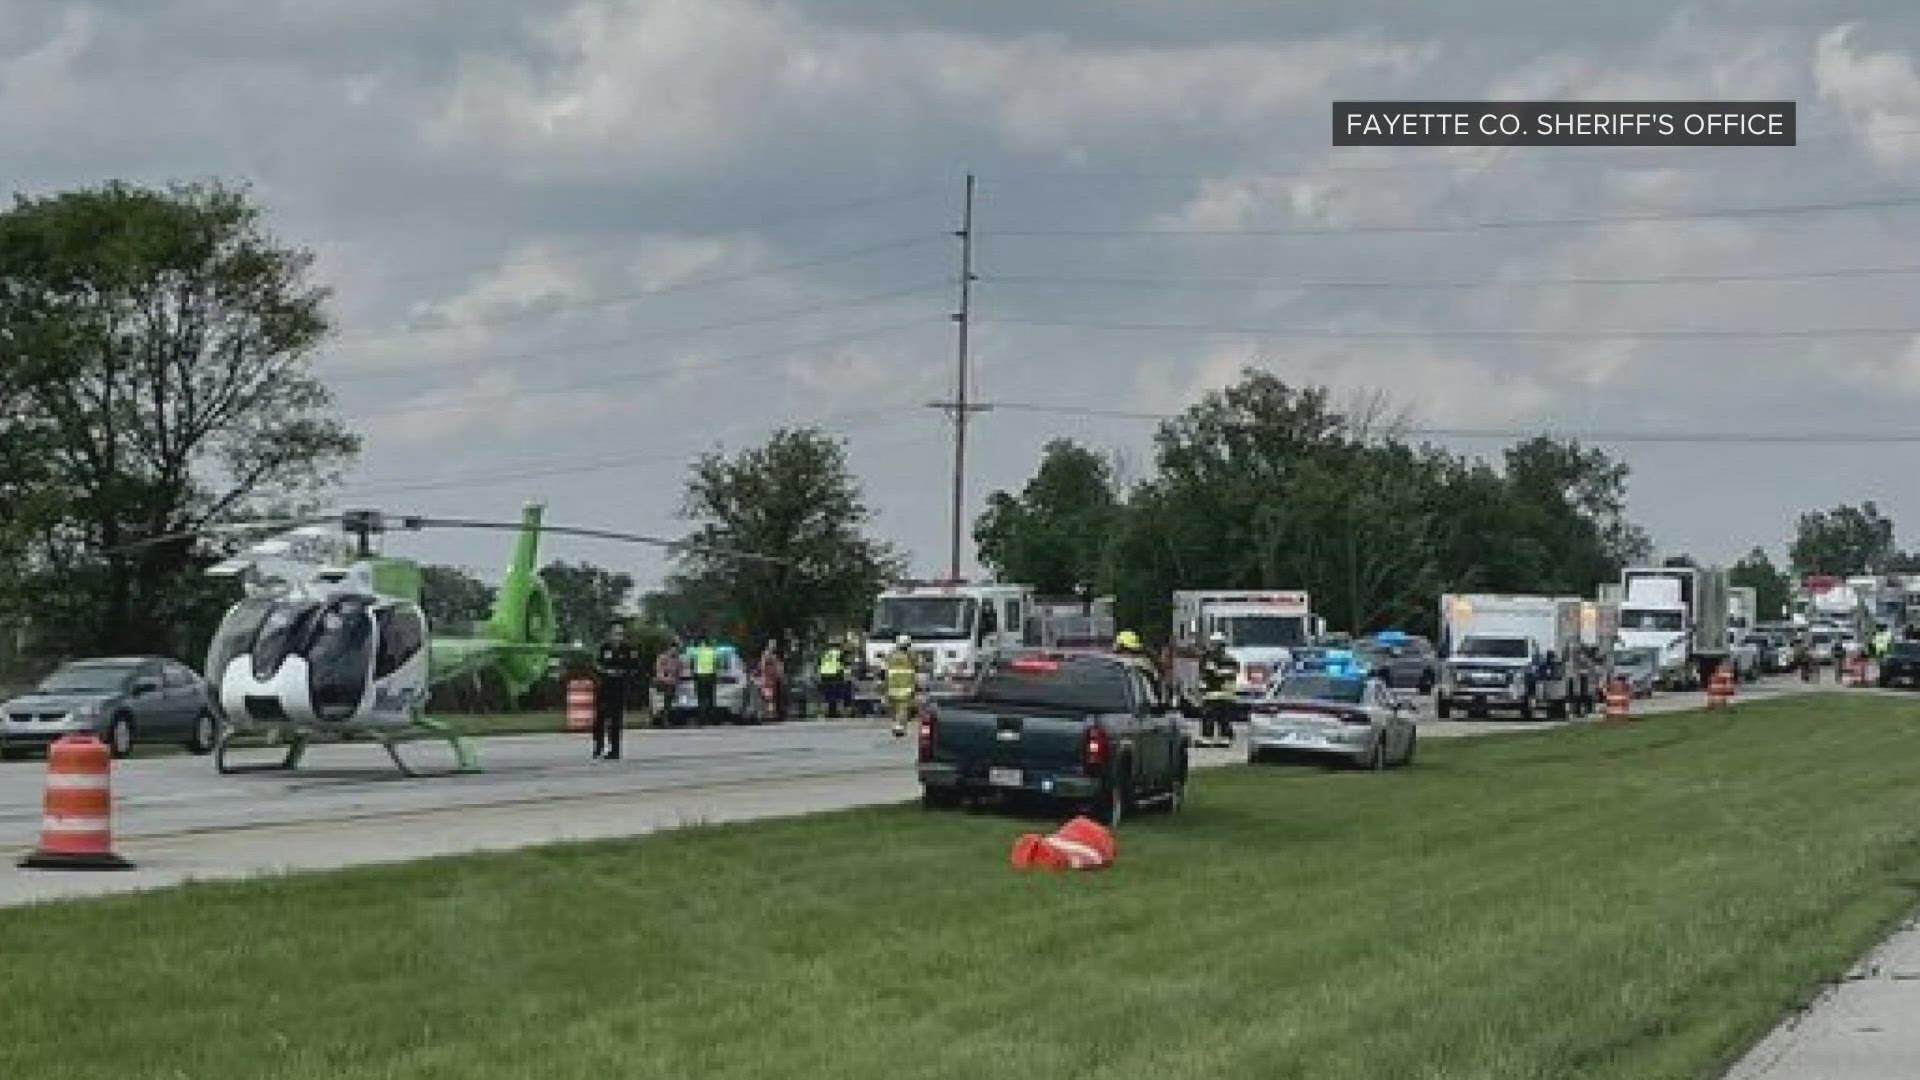 All lanes of I-71 South between state Route 35 and state Route 41 interchange were closed for over an hour after the crash.